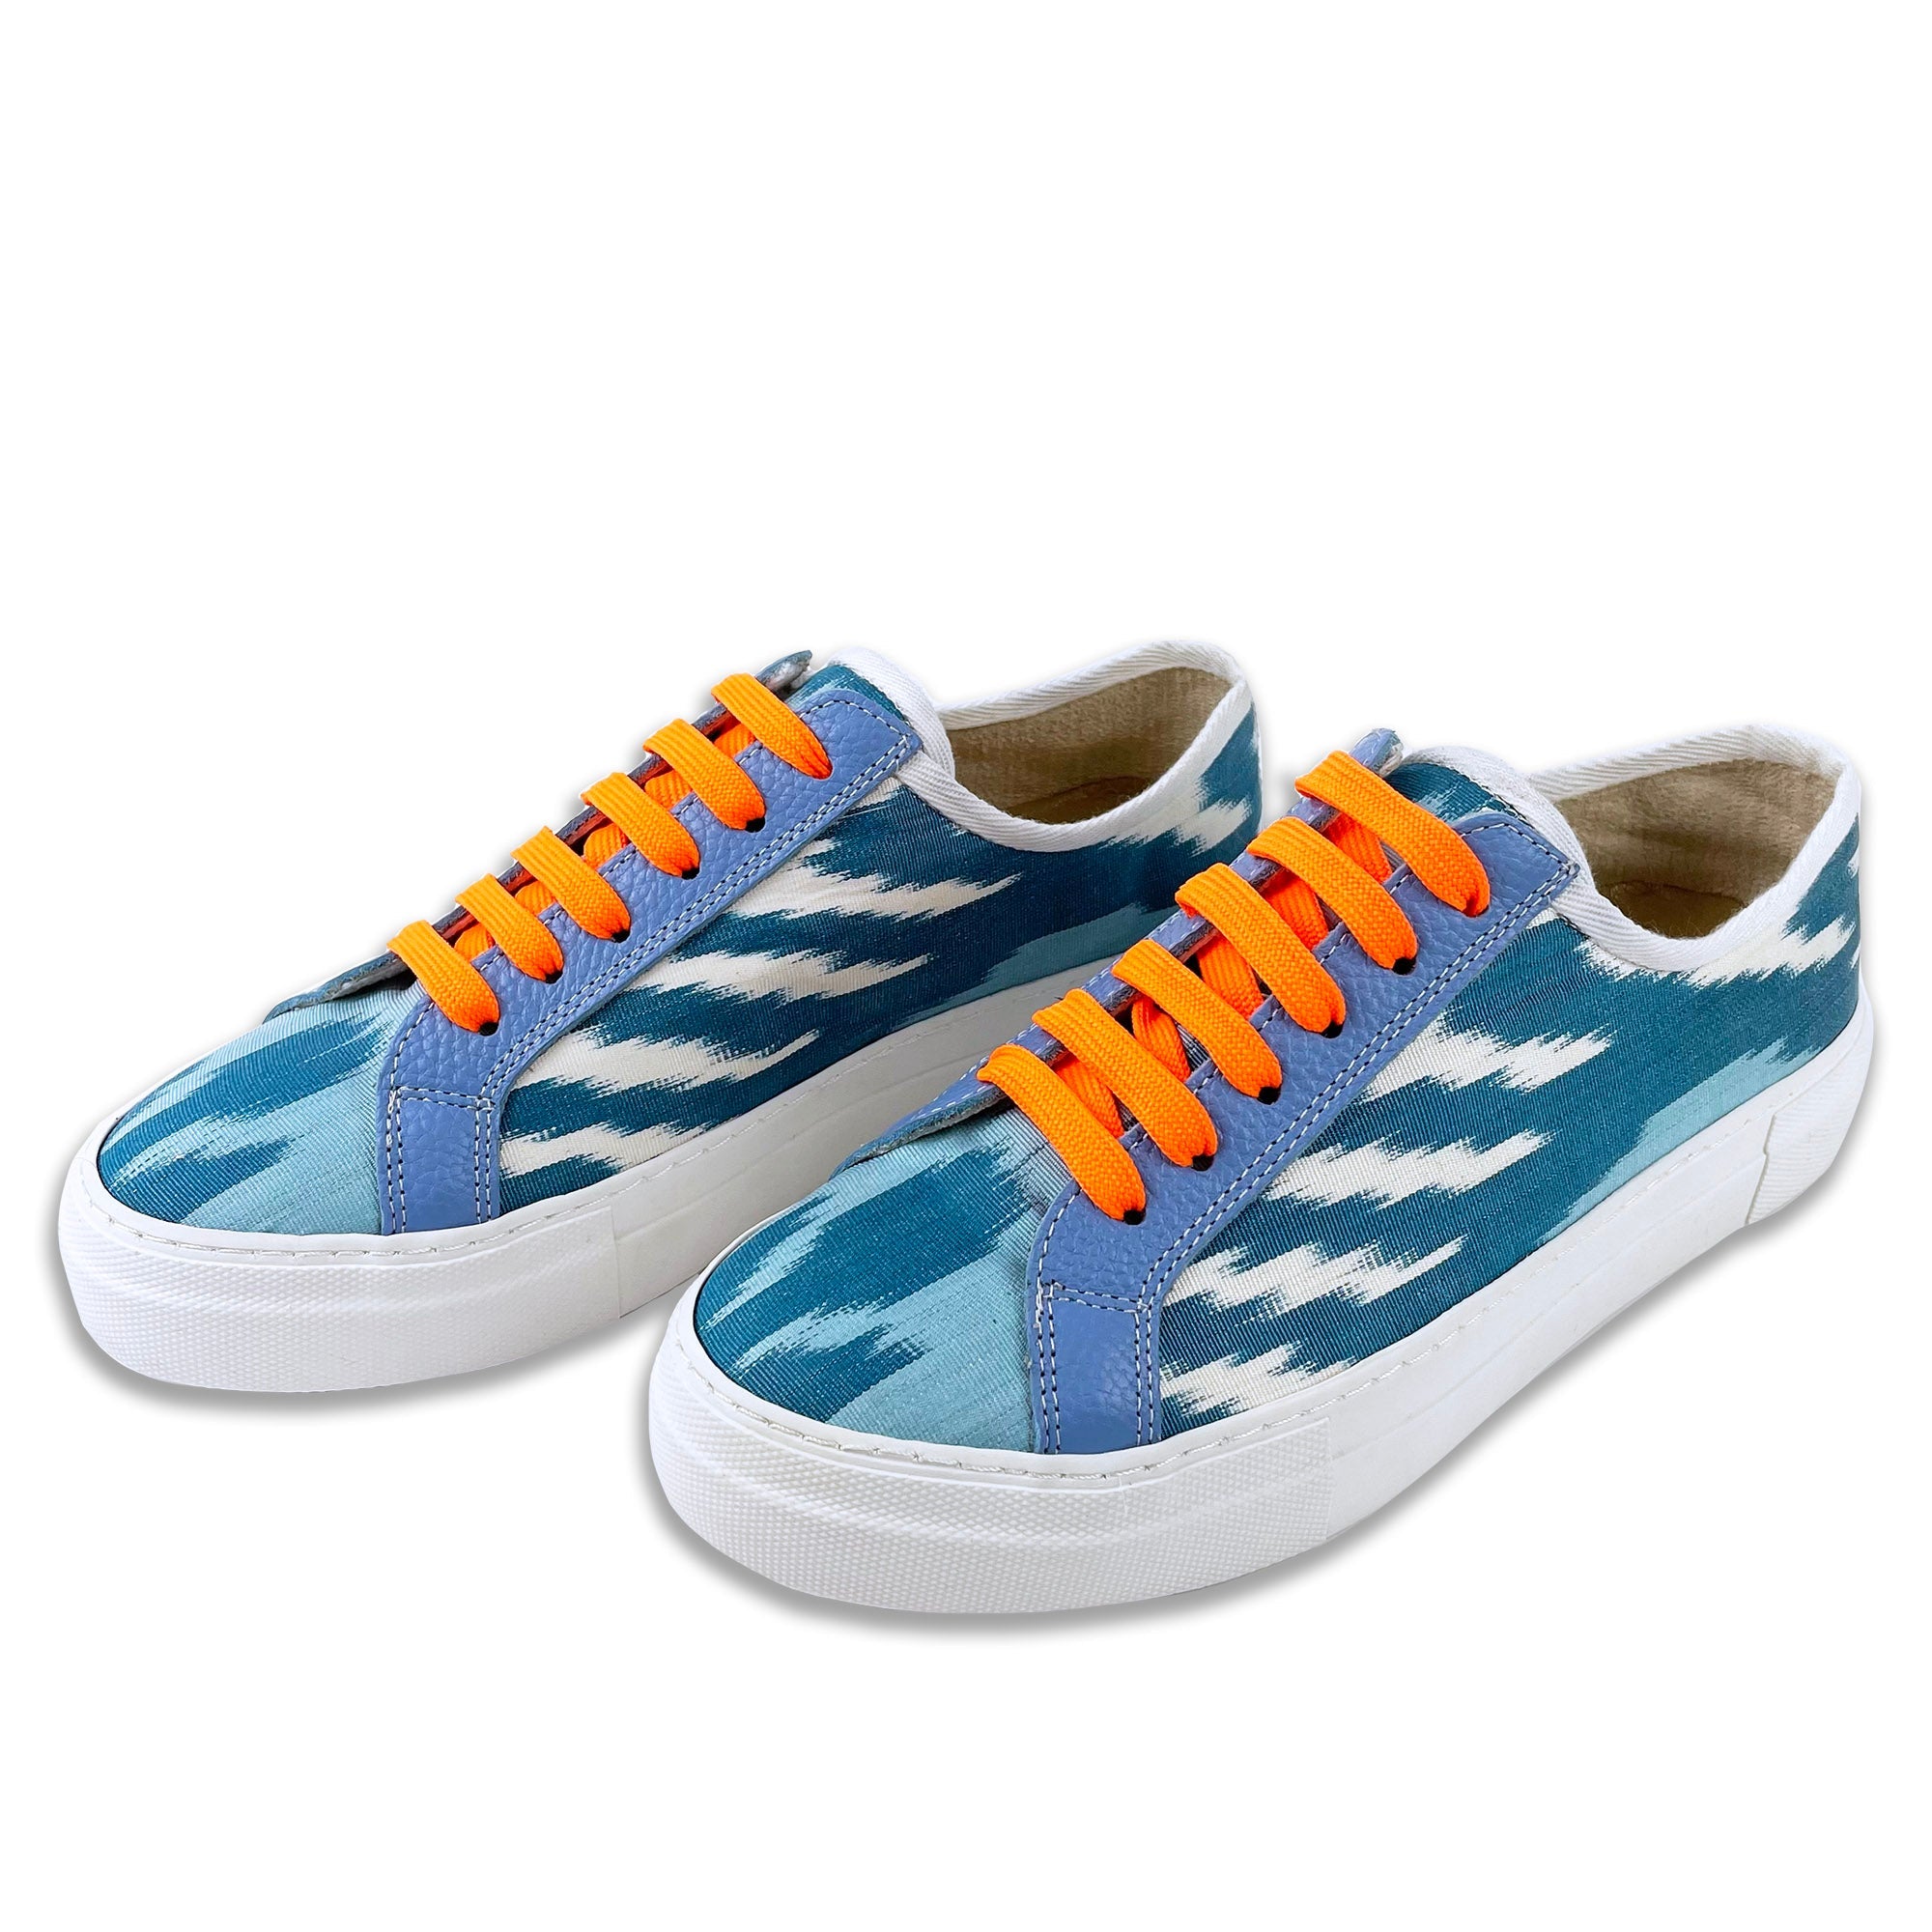 Cloud Hoppers - 'She Who Dares' Sneakers